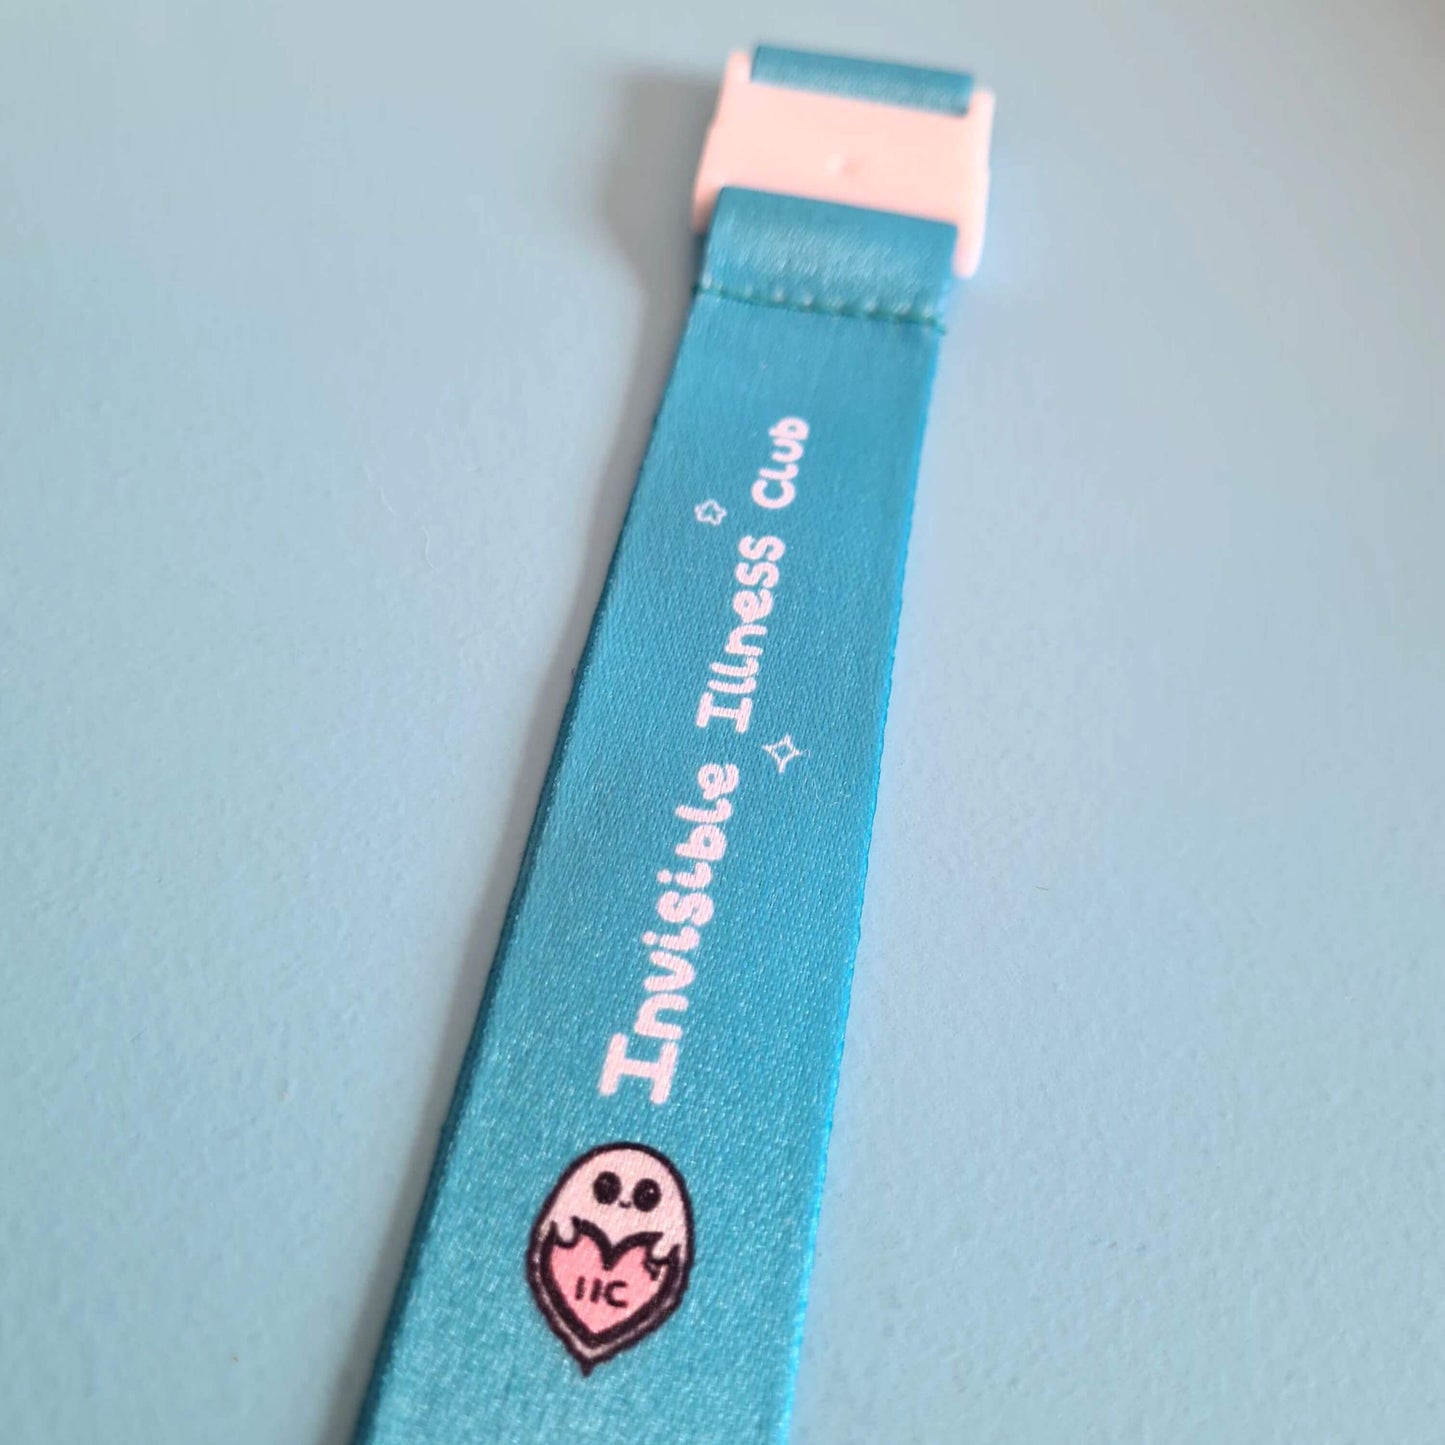 The Invisible Illness Club Lanyard on a pastel blue background. The pastel blue lanyard has repeating white text reading 'invisible illness club' and innabox pastel ghost logo. It has a silver lobster clip and white safety break. The hand drawn design is raising awareness for hidden disabilities.